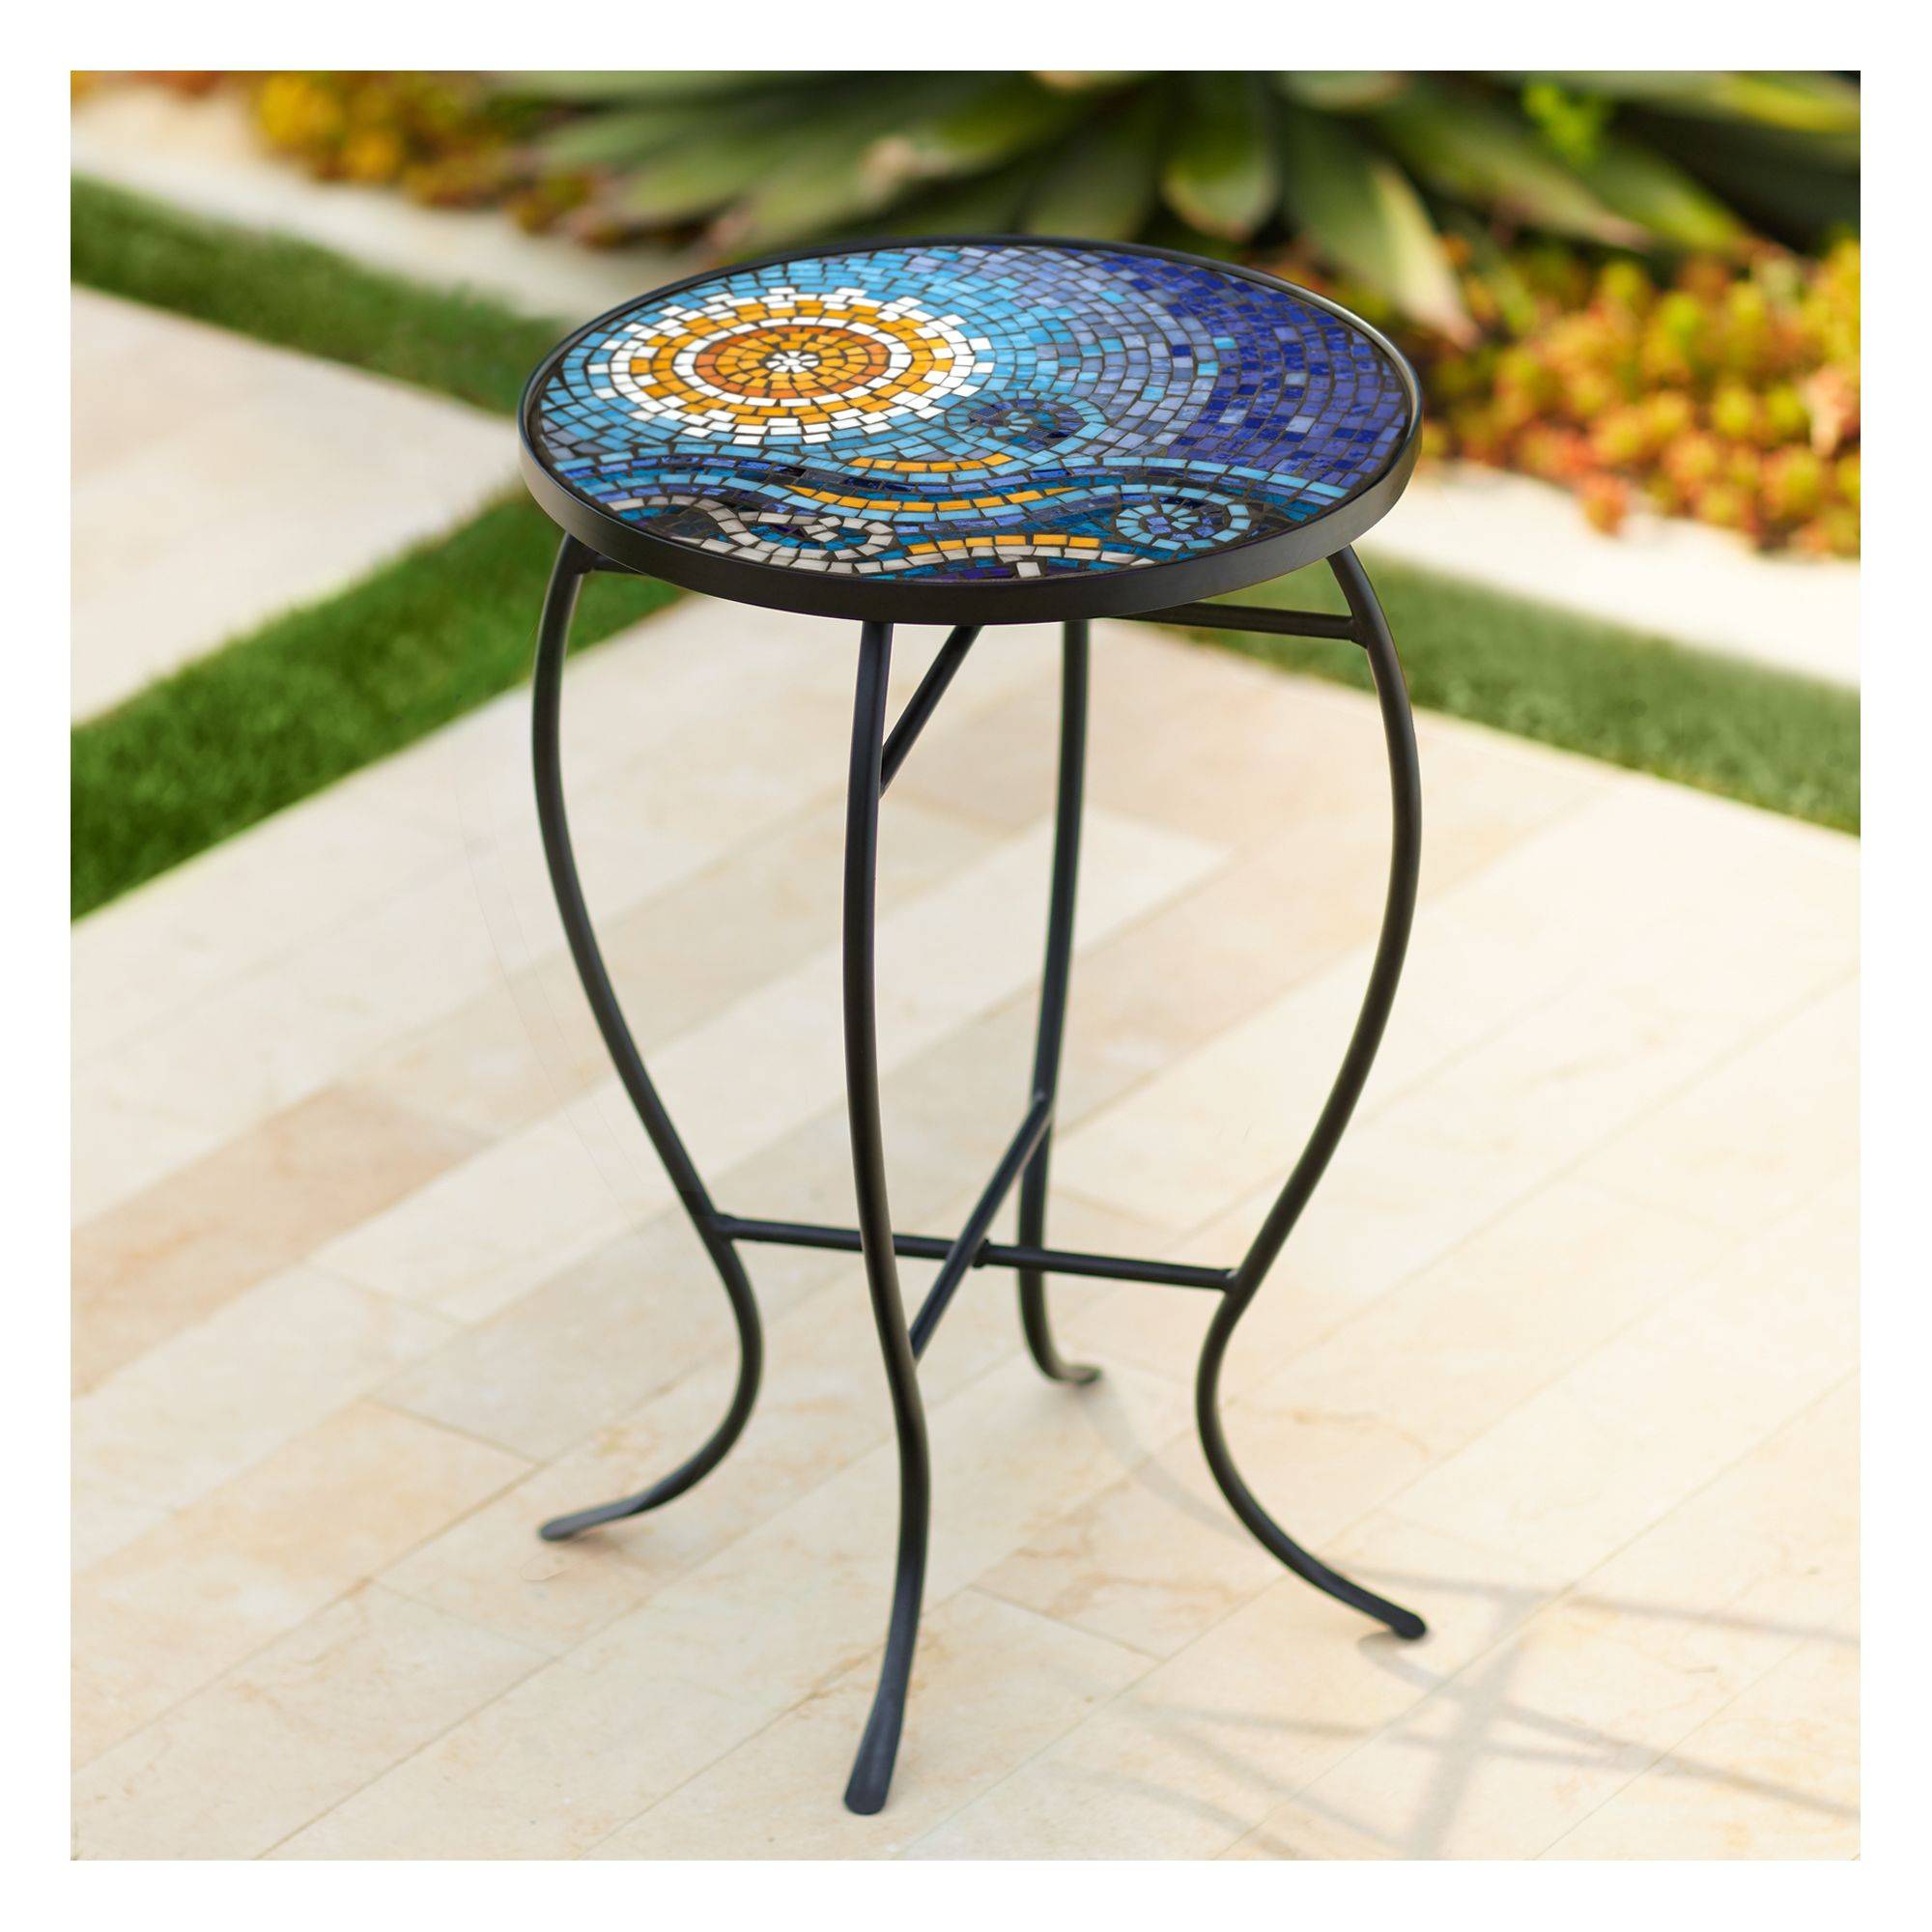 Mosaic Coffee Table Small Patio Table Natural Stone Garden